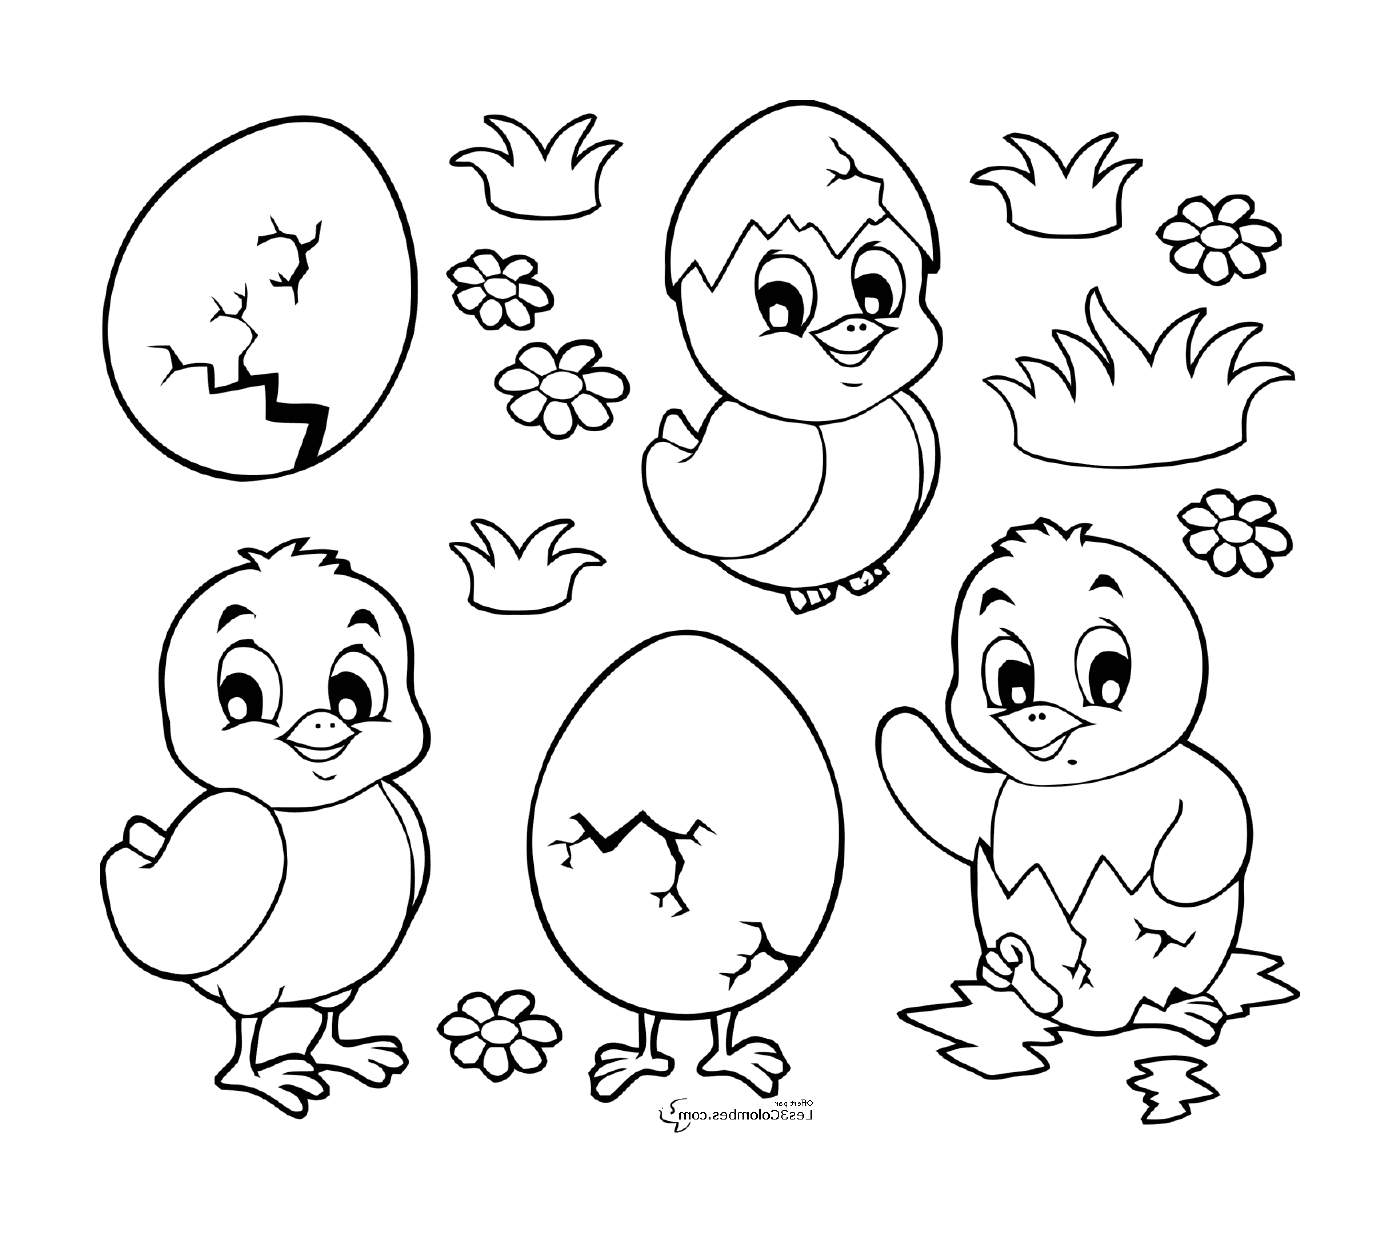  A group of chicks and an Easter egg 